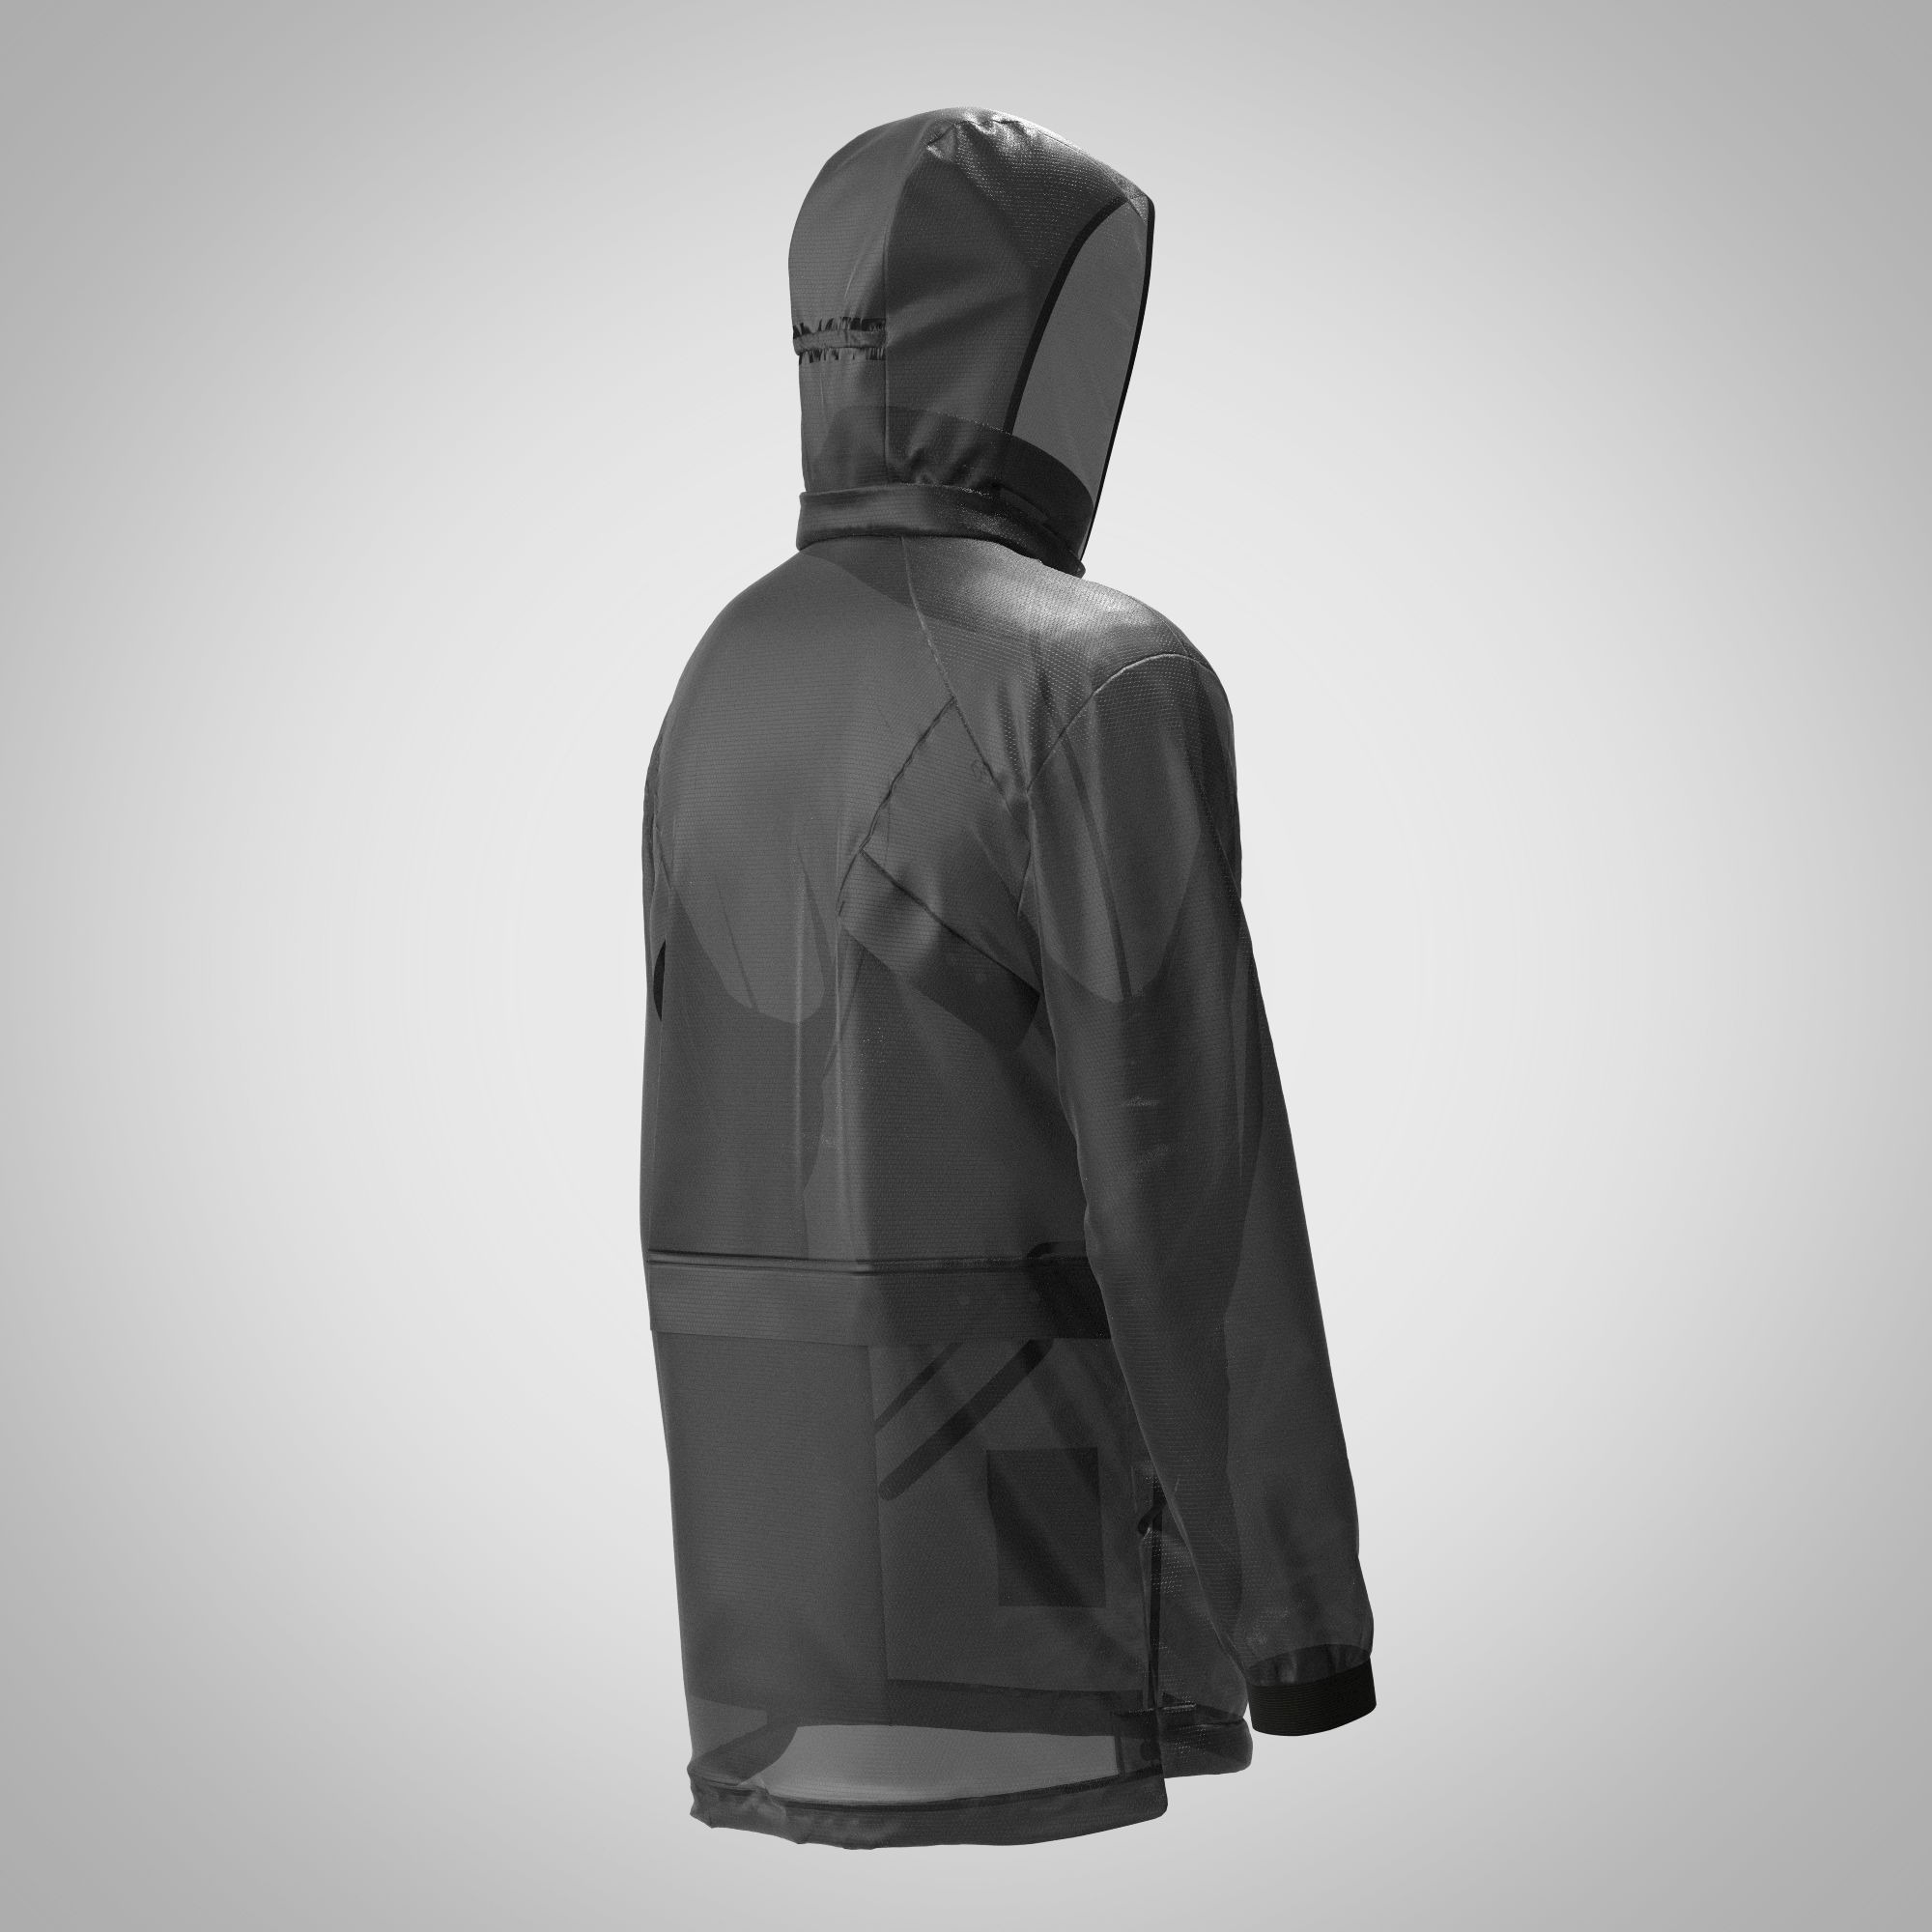 The Nomad(e) Jacket In Black by Graphene-X #07